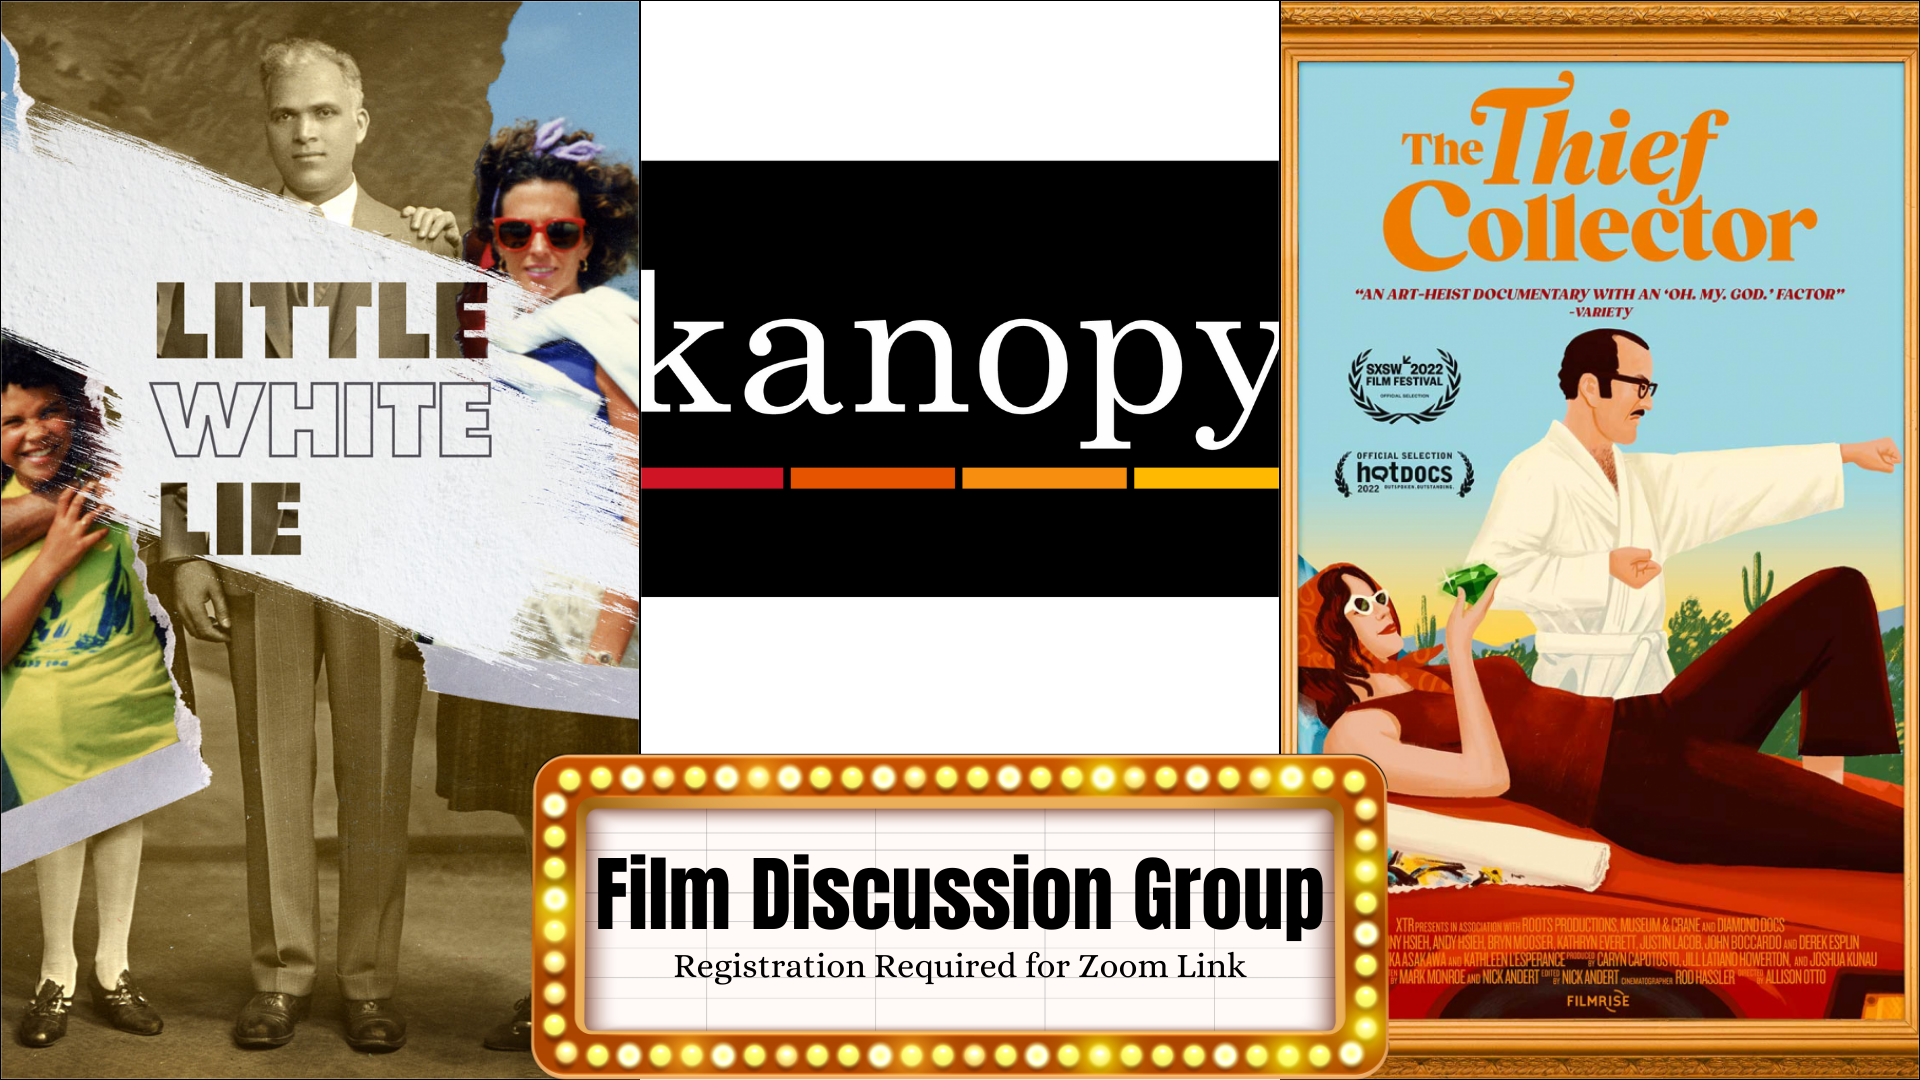 Film Discussion Group - registration required for zoom link